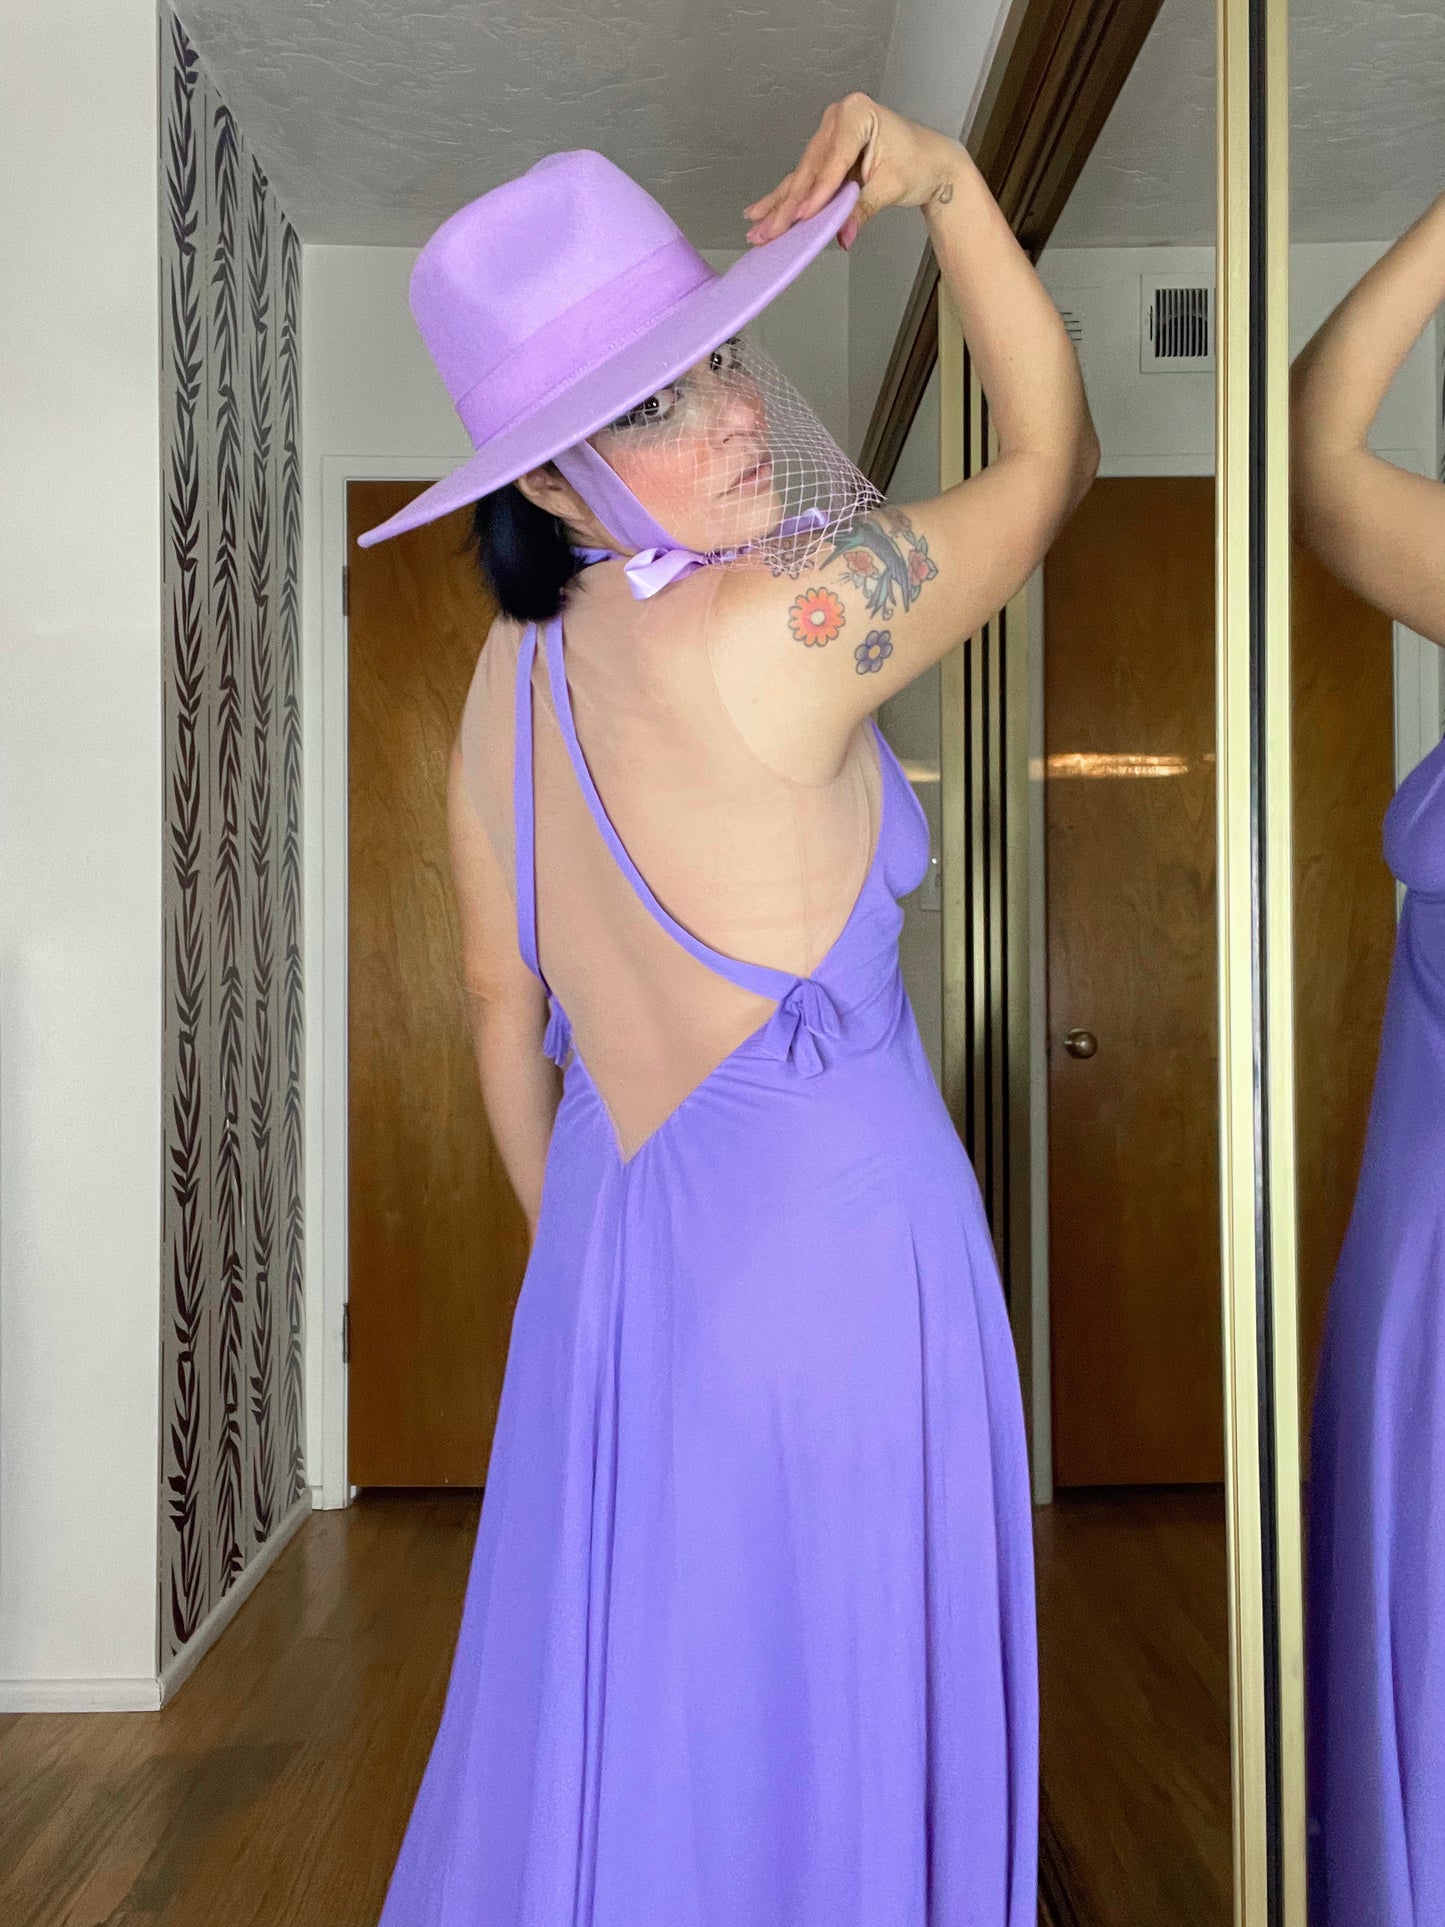 Vintage 60s Claire Sandra by Lucie Ann Beverly Hills Lavender Slip Dress Fits Sizes XS-SM & Possible Size M